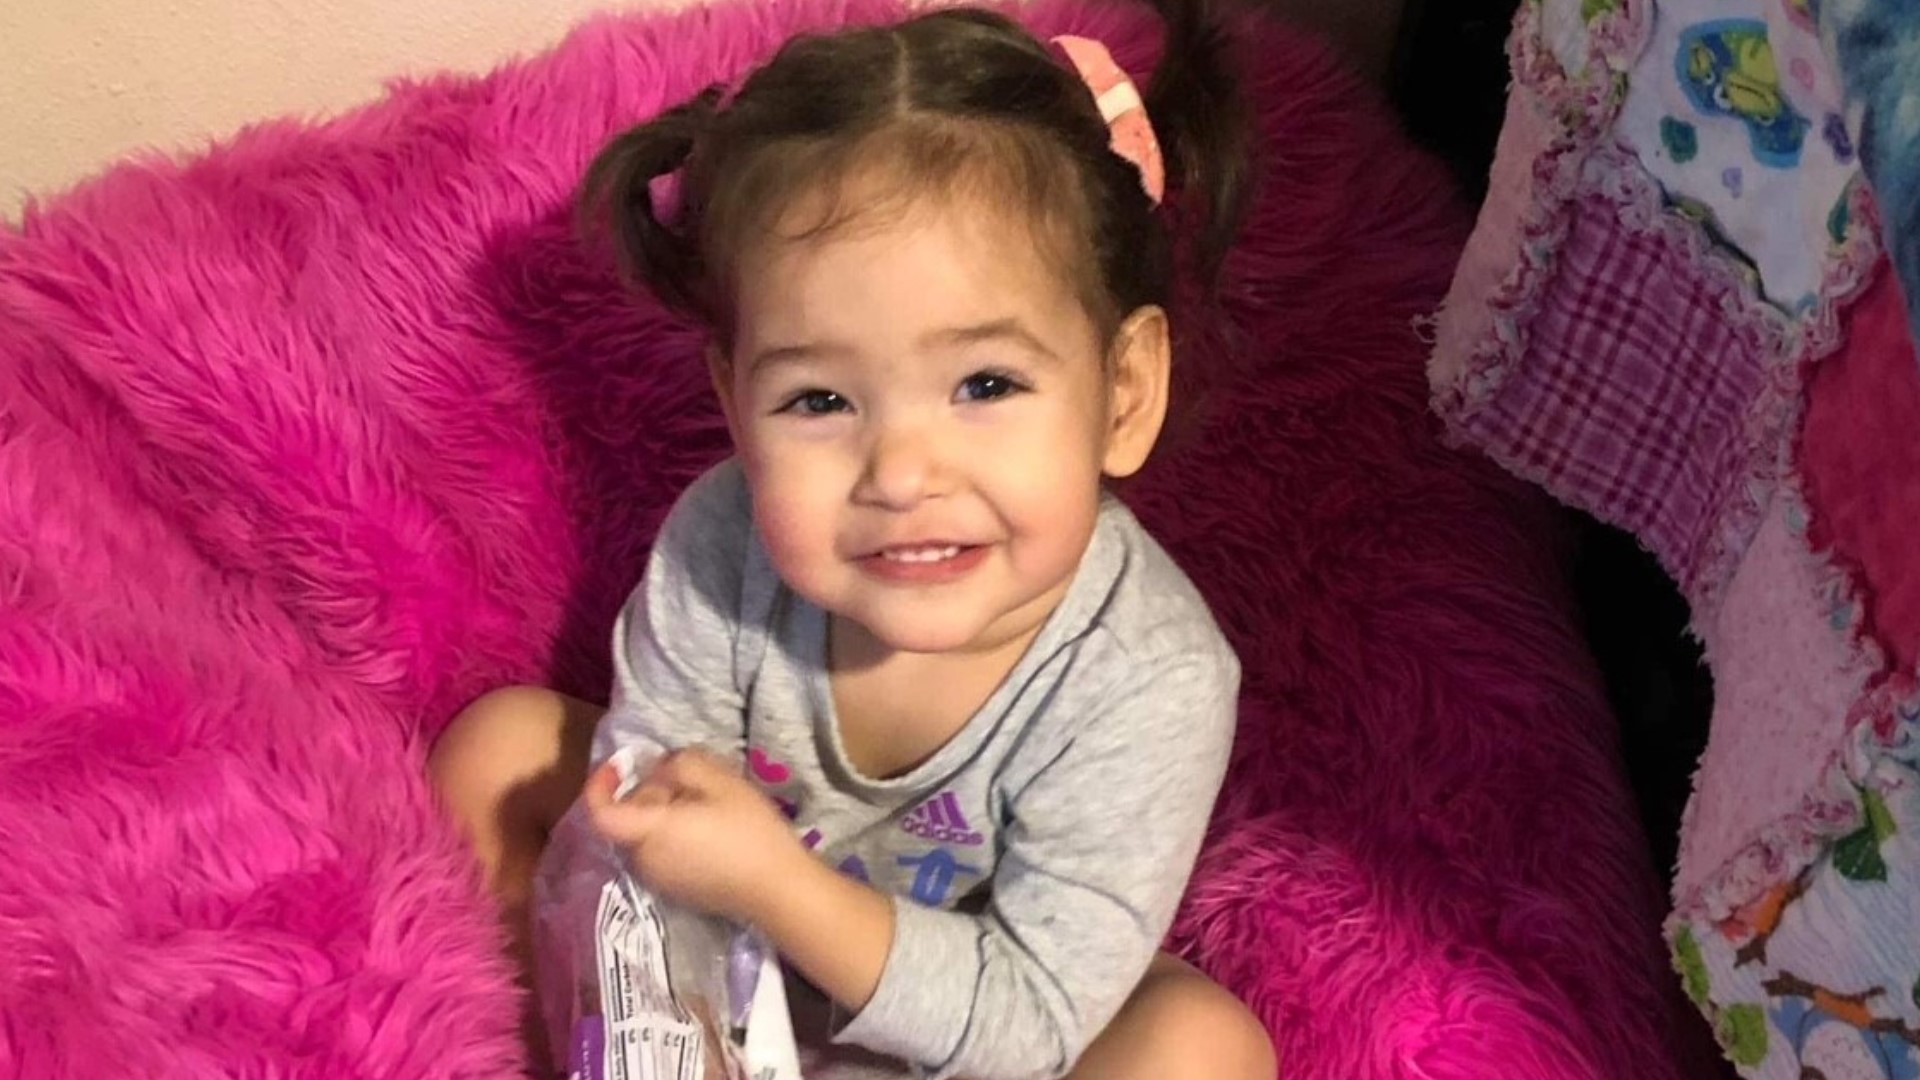 A search warrant for cell phones and the child’s family home details what happened before Azaelia Raine RedHorse Jones was taken to Sacred Heart for treatment.